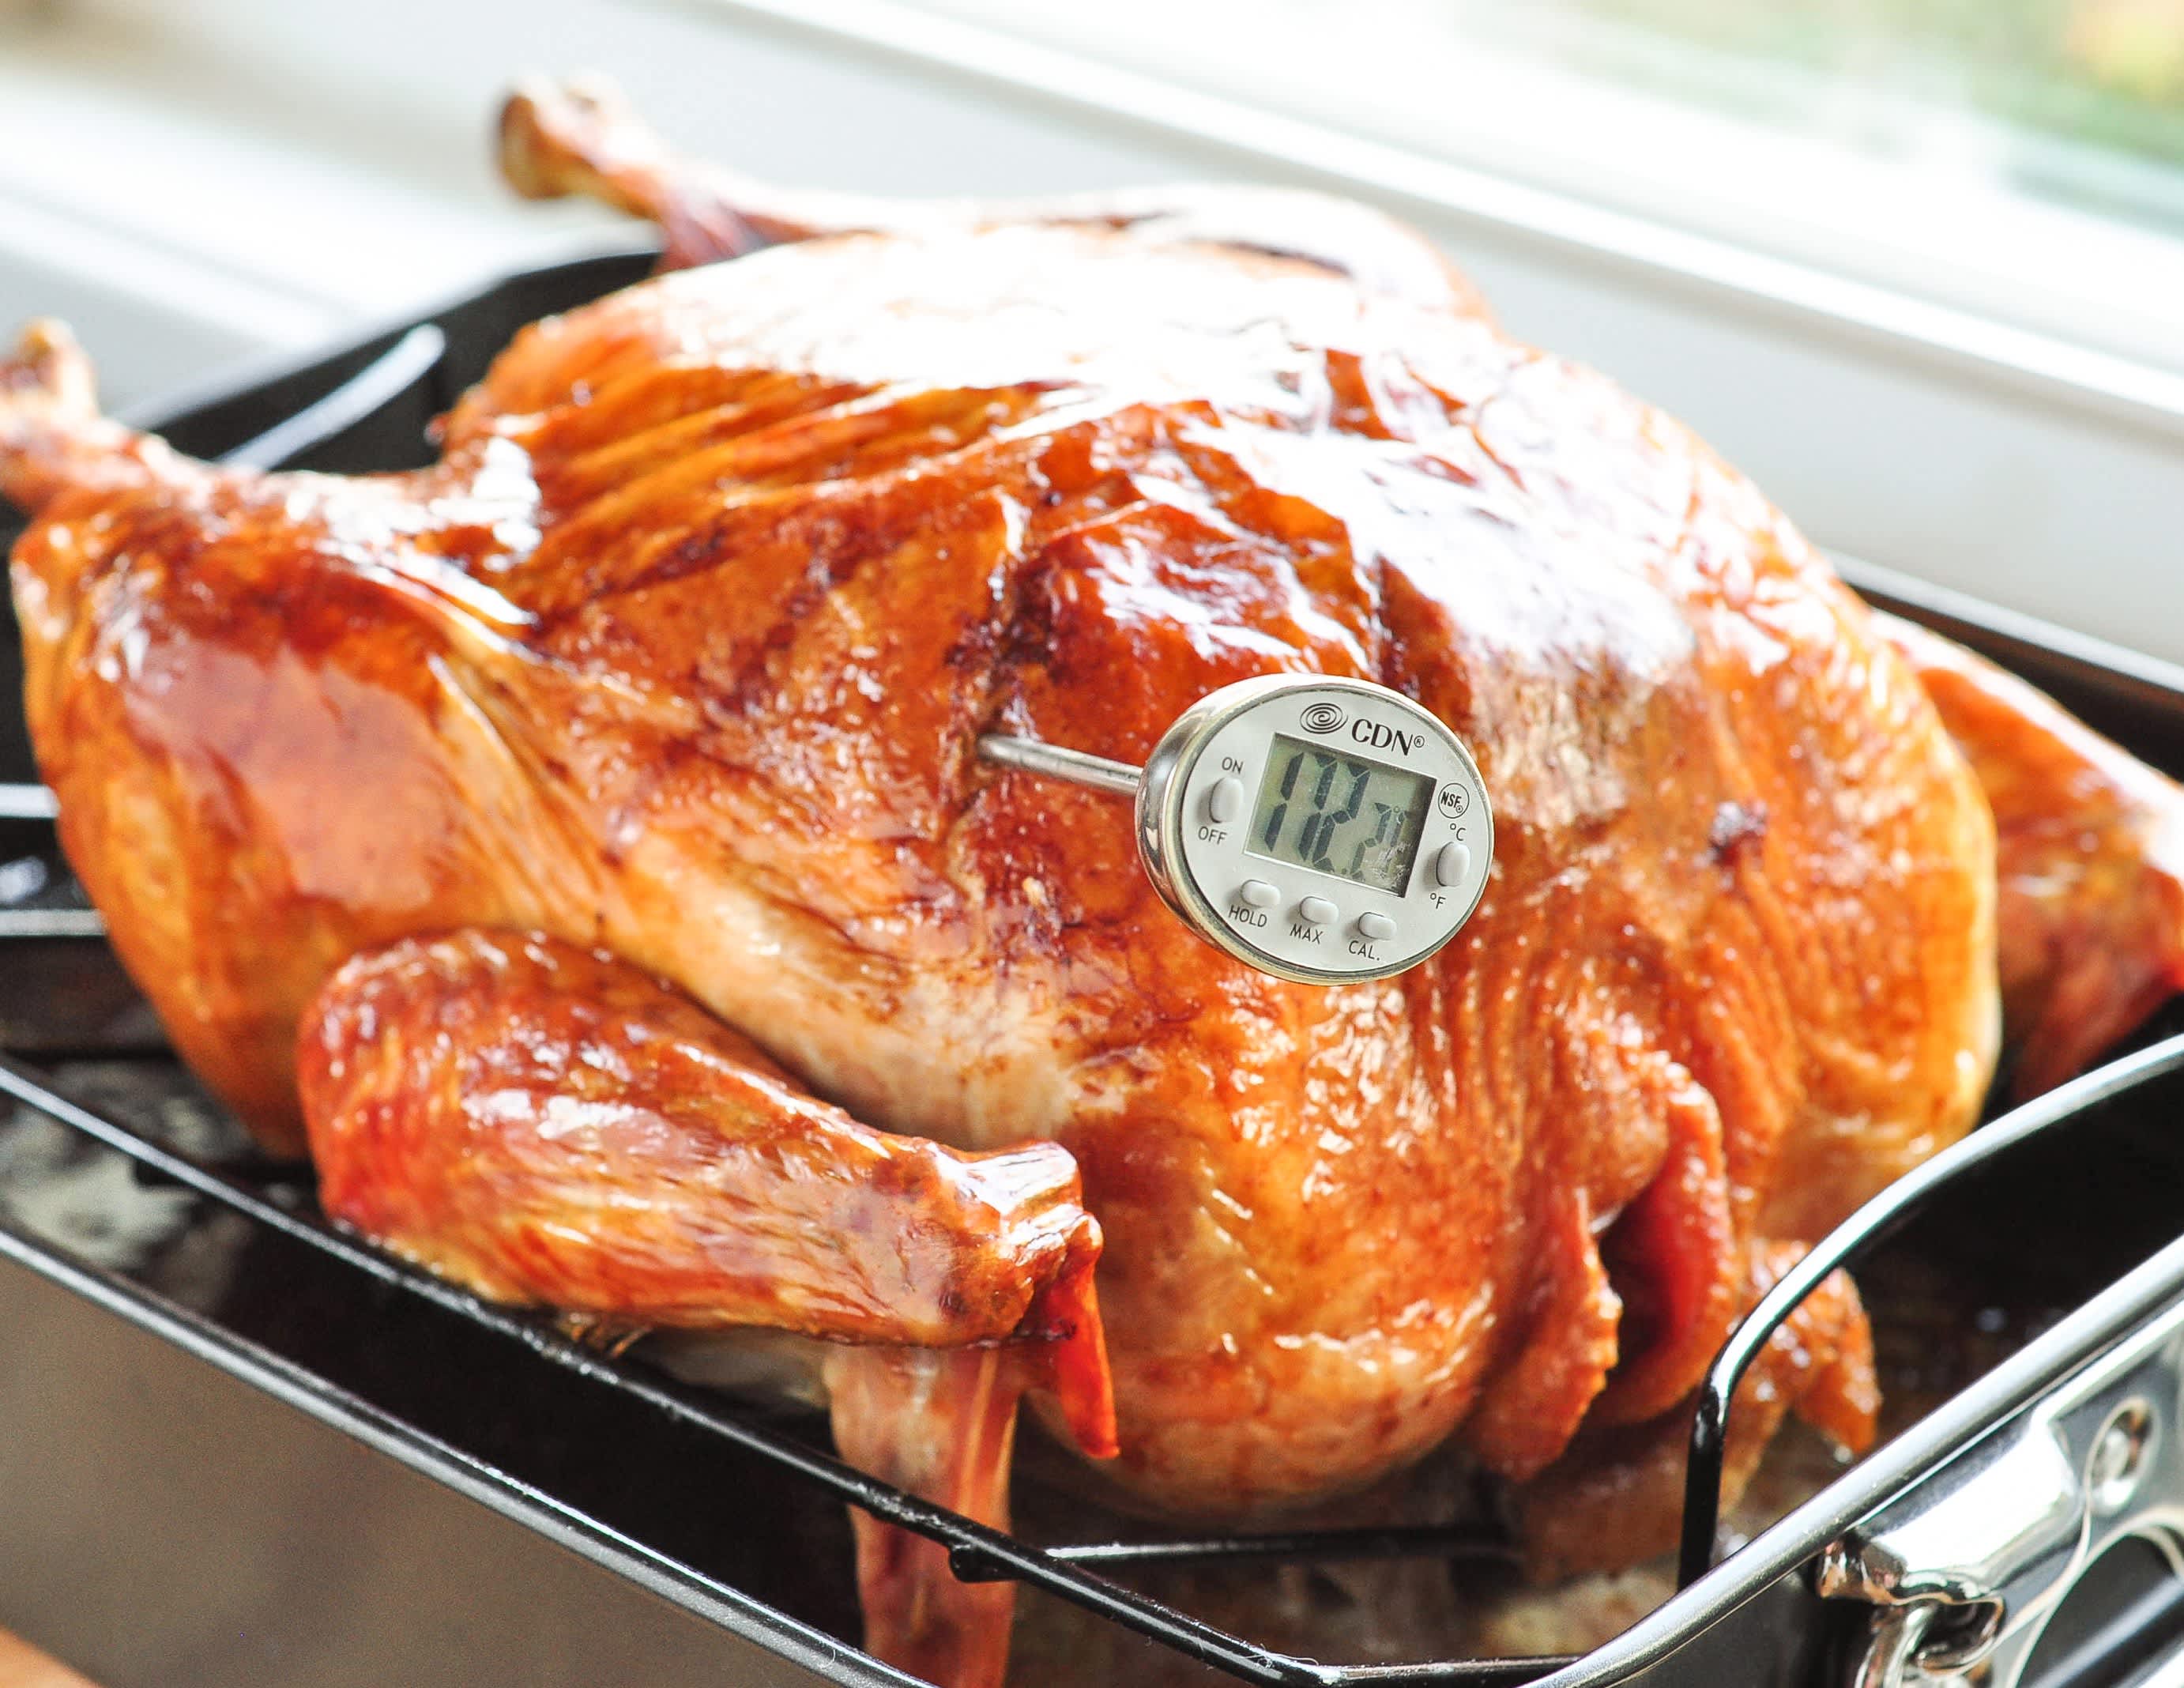 At What Temp is Turkey Done and Safe to Eat? Here's What to Know